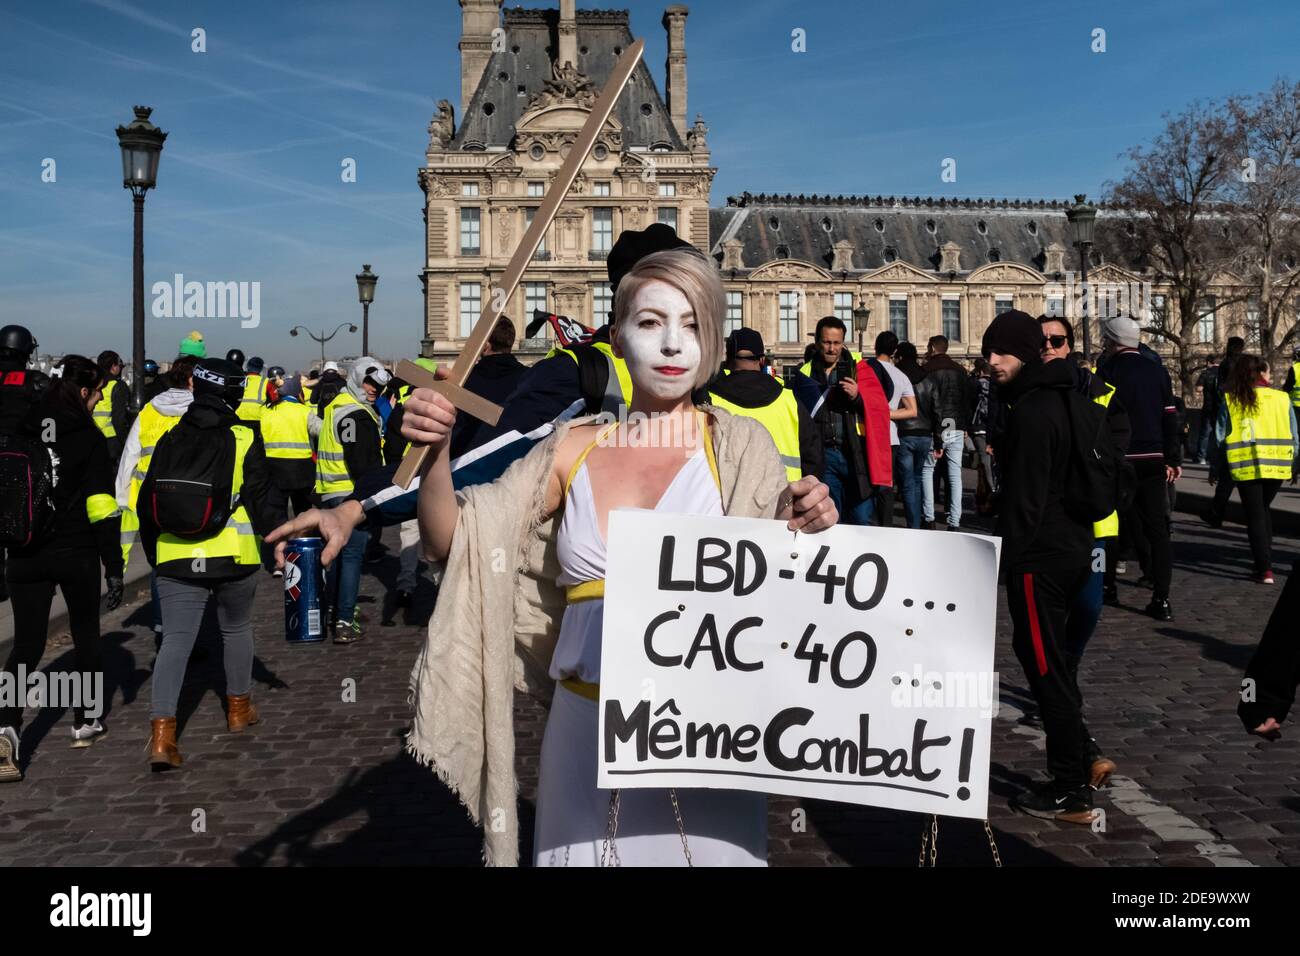 A demonstrator dressed as a figure of justice holds a sign that reads "CAC  40, LBD 40, same fight". Several thousand people gathered to demonstrate  during act 14 of the protest movement